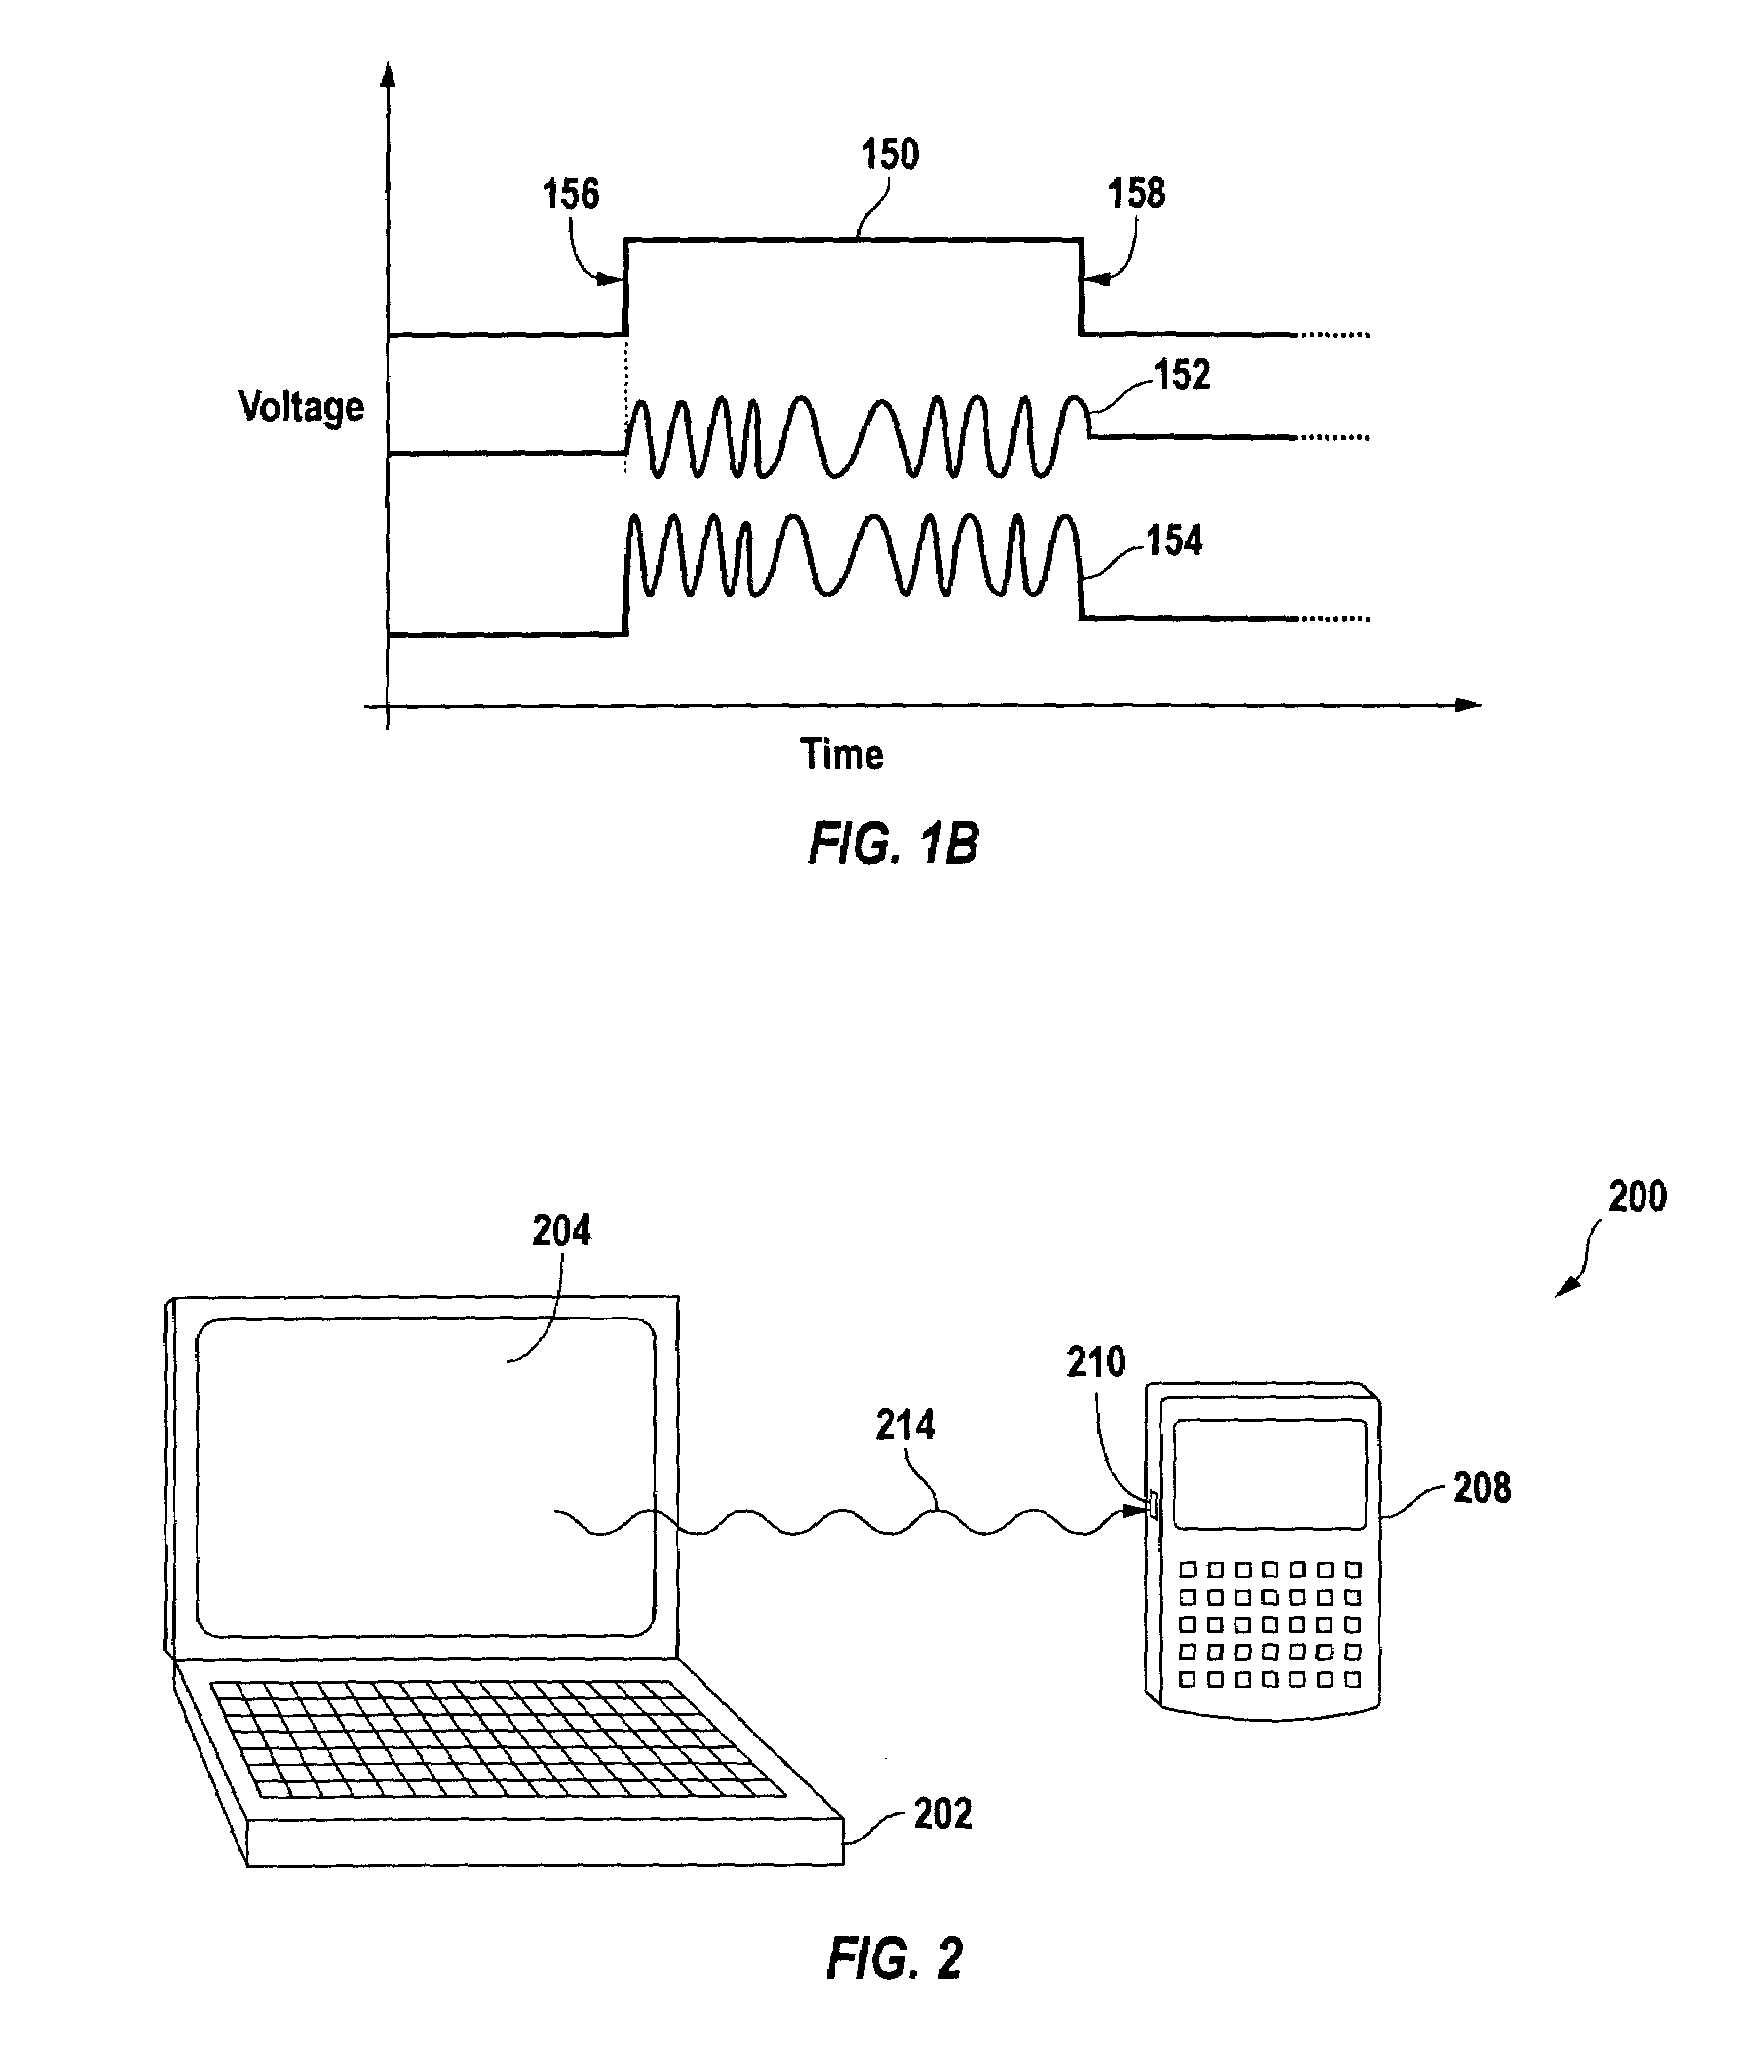 Method and apparatus for communication using pulse-width-modulated visible light